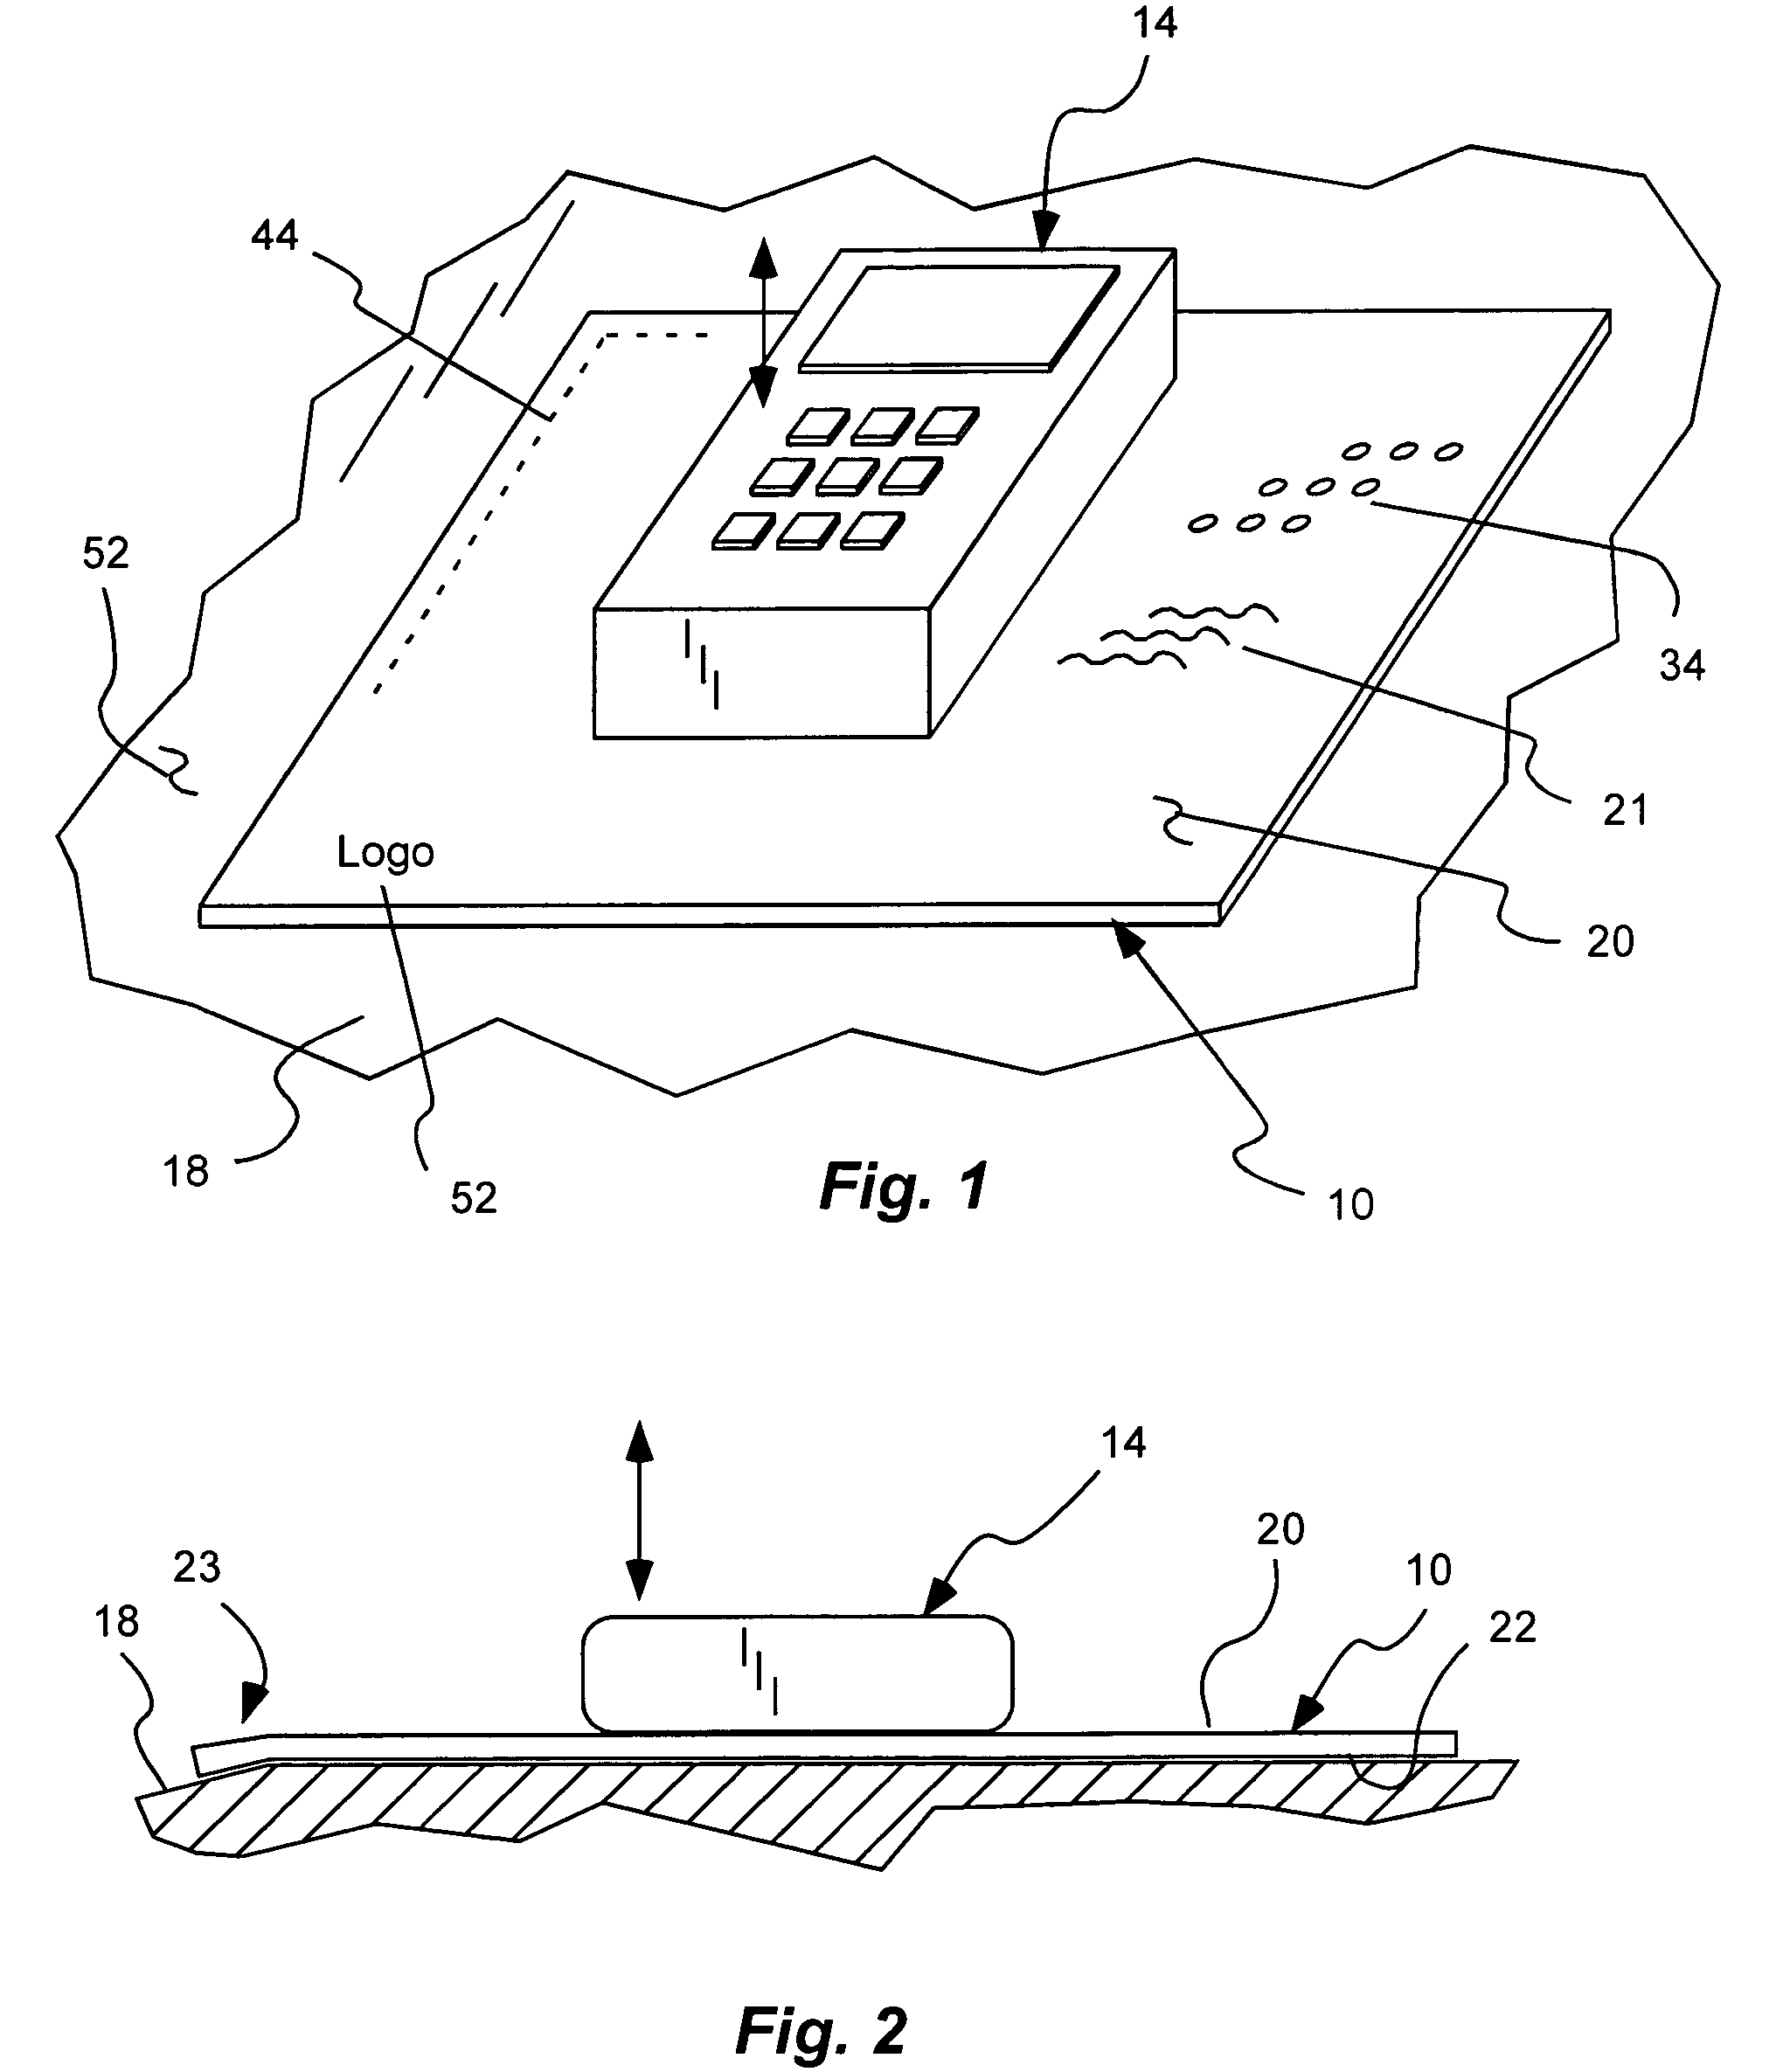 Frictional holding pad